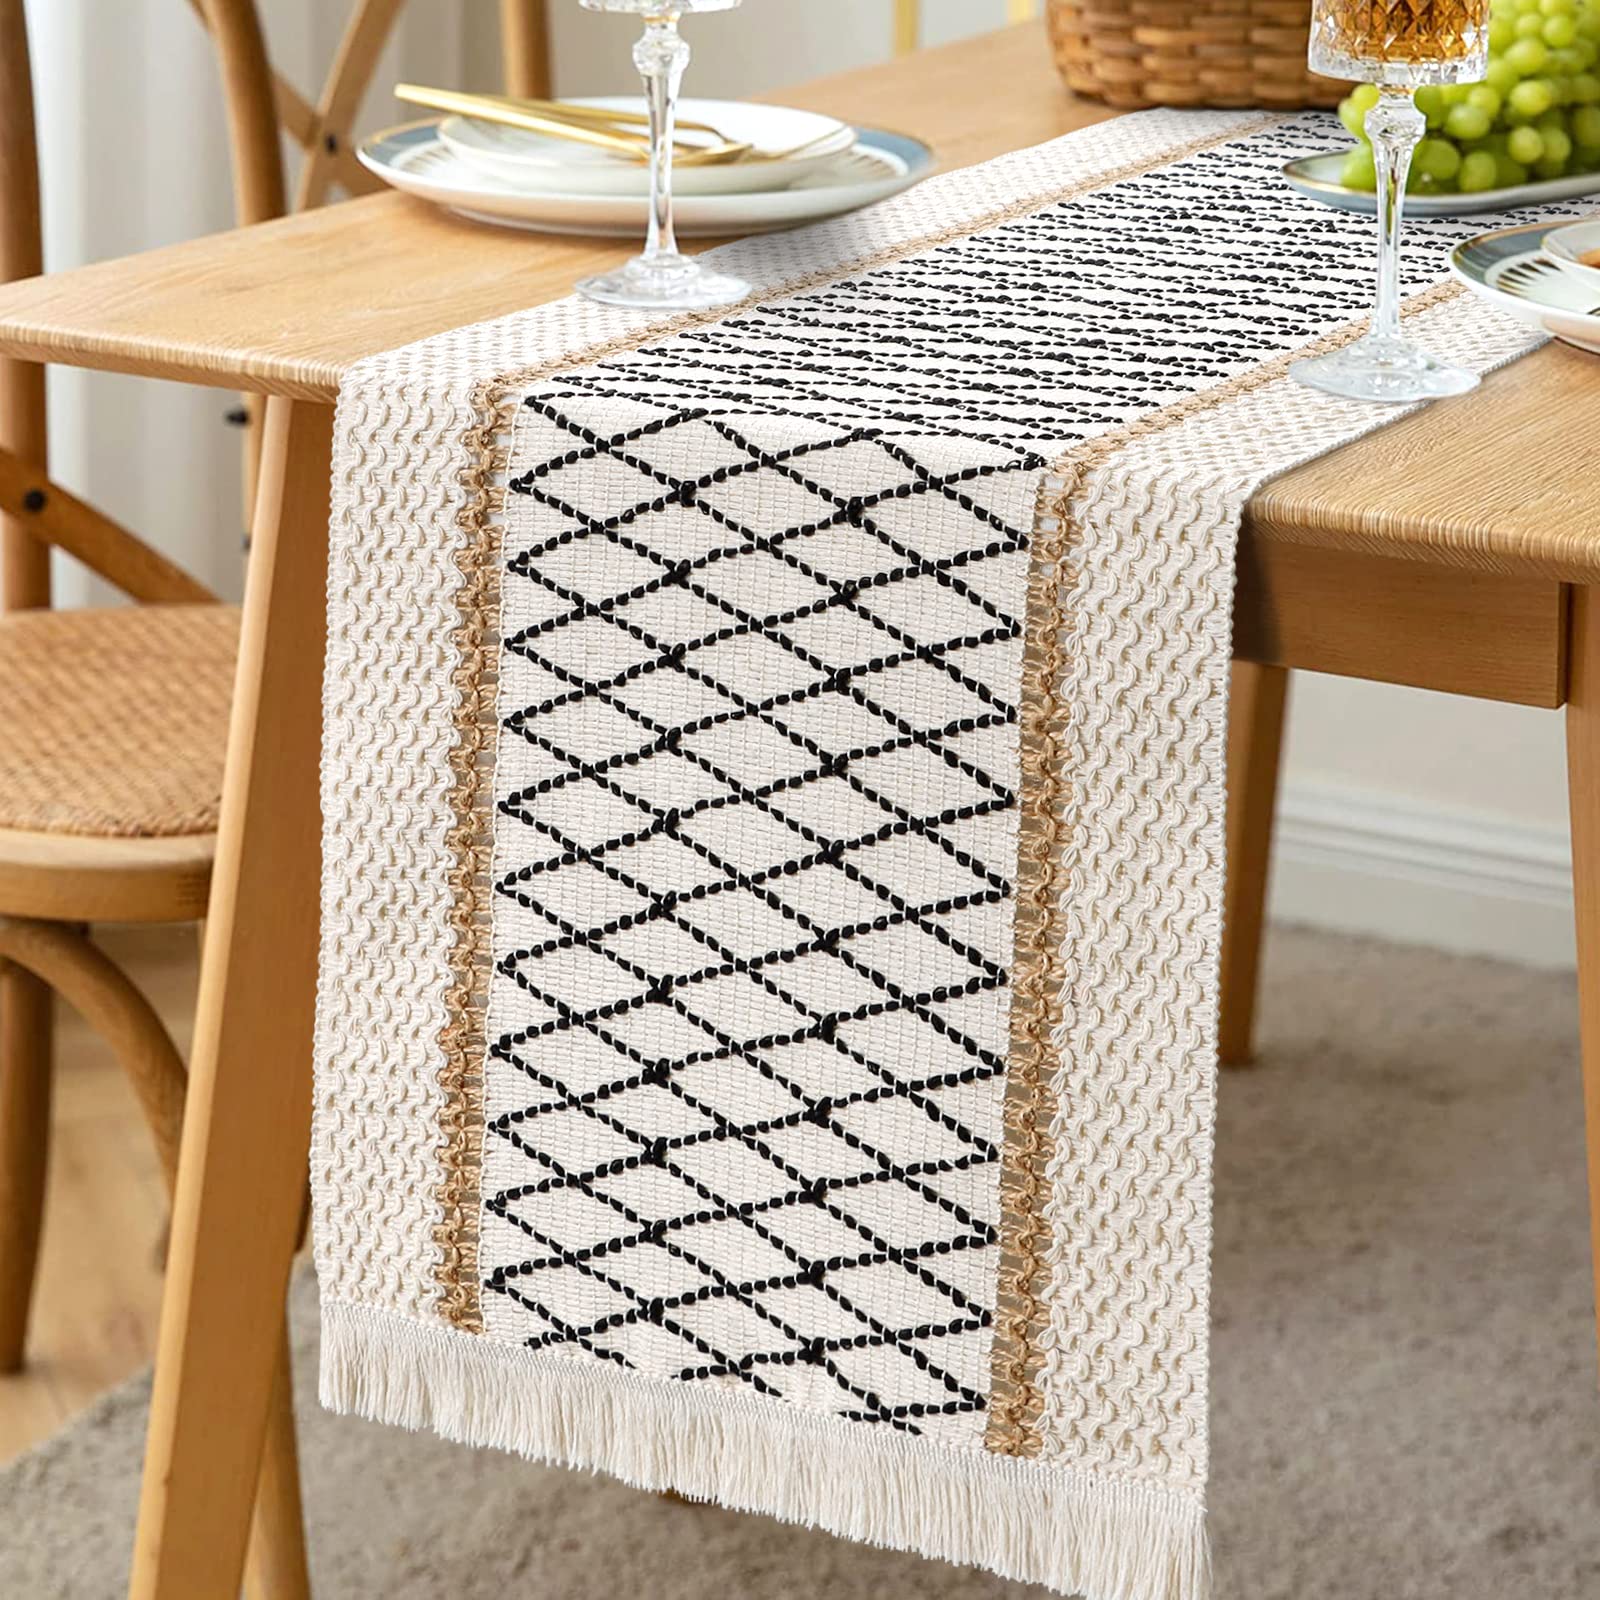 LOMOHOO Macrame Table Runner,Cream Beige Boho Table Runner with Tassels,Hand Woven Cotton and Burlap Splicing Table Runner,Rustic Farmhouse Table Runner for Bohemian,Kitchen Dining Table